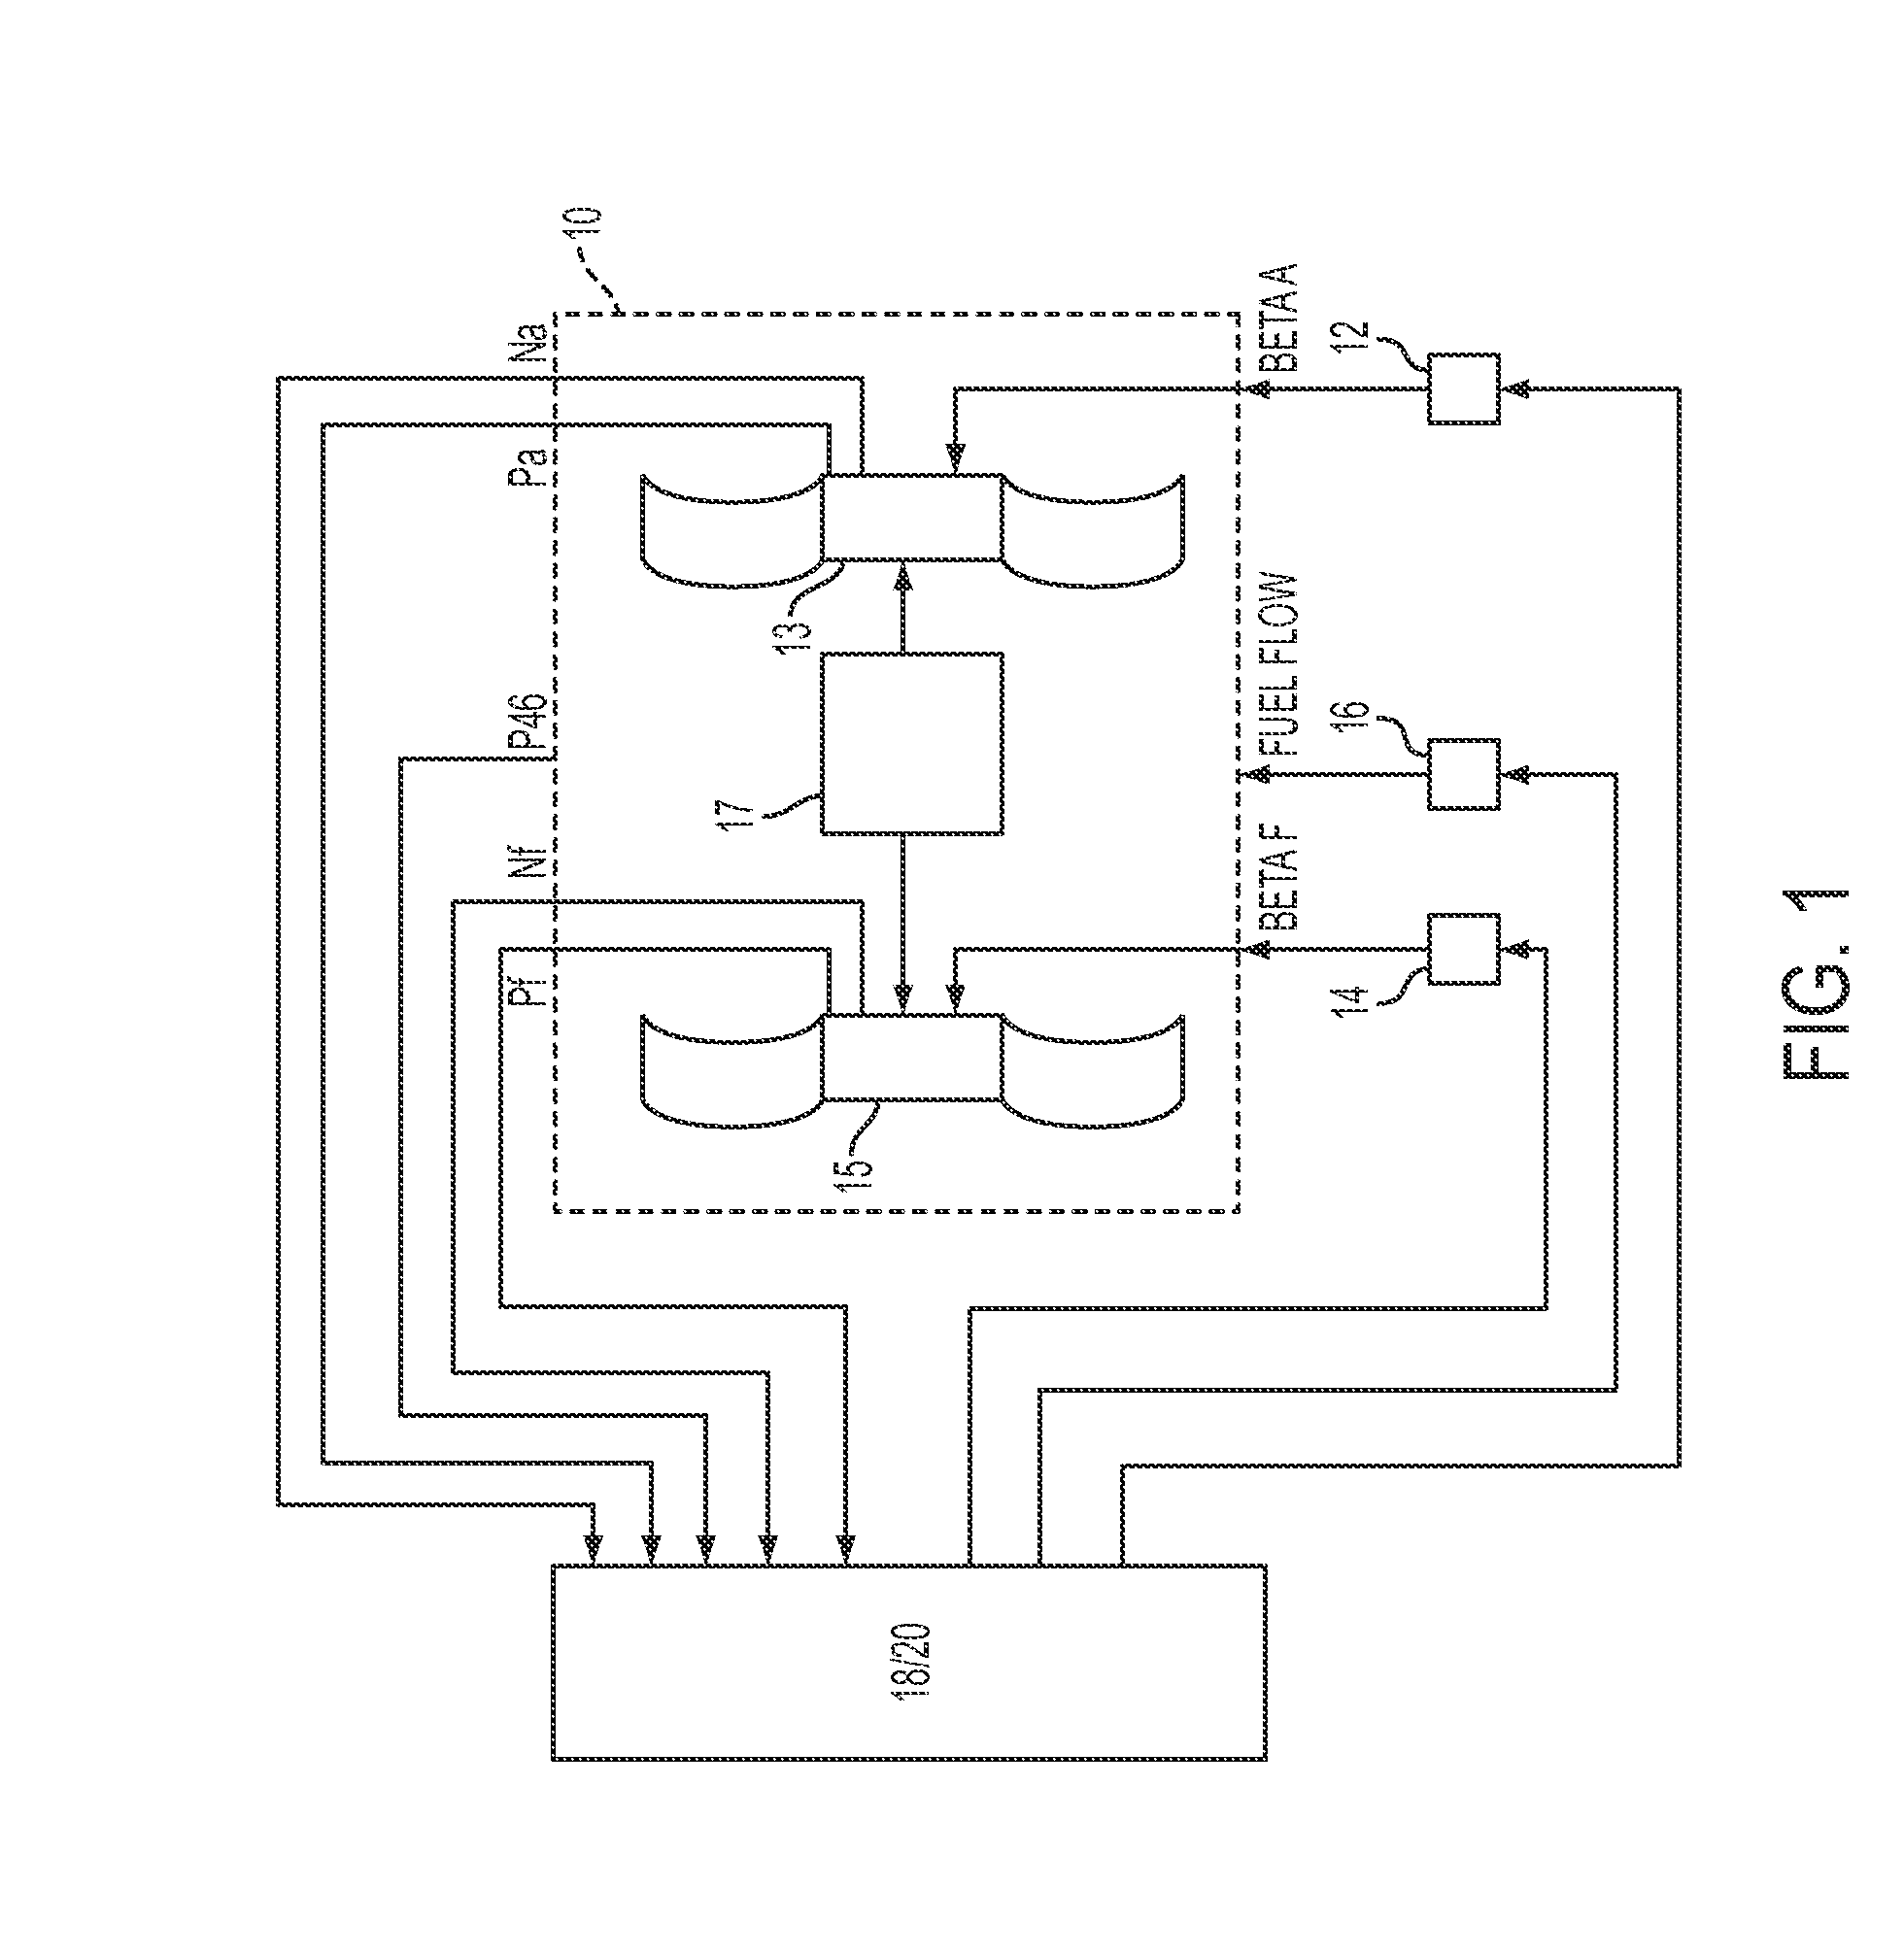 Methods and Apparatuses for Non-Model Based Control for Counter-Rotating Open-Rotor Gas Turbine Engine